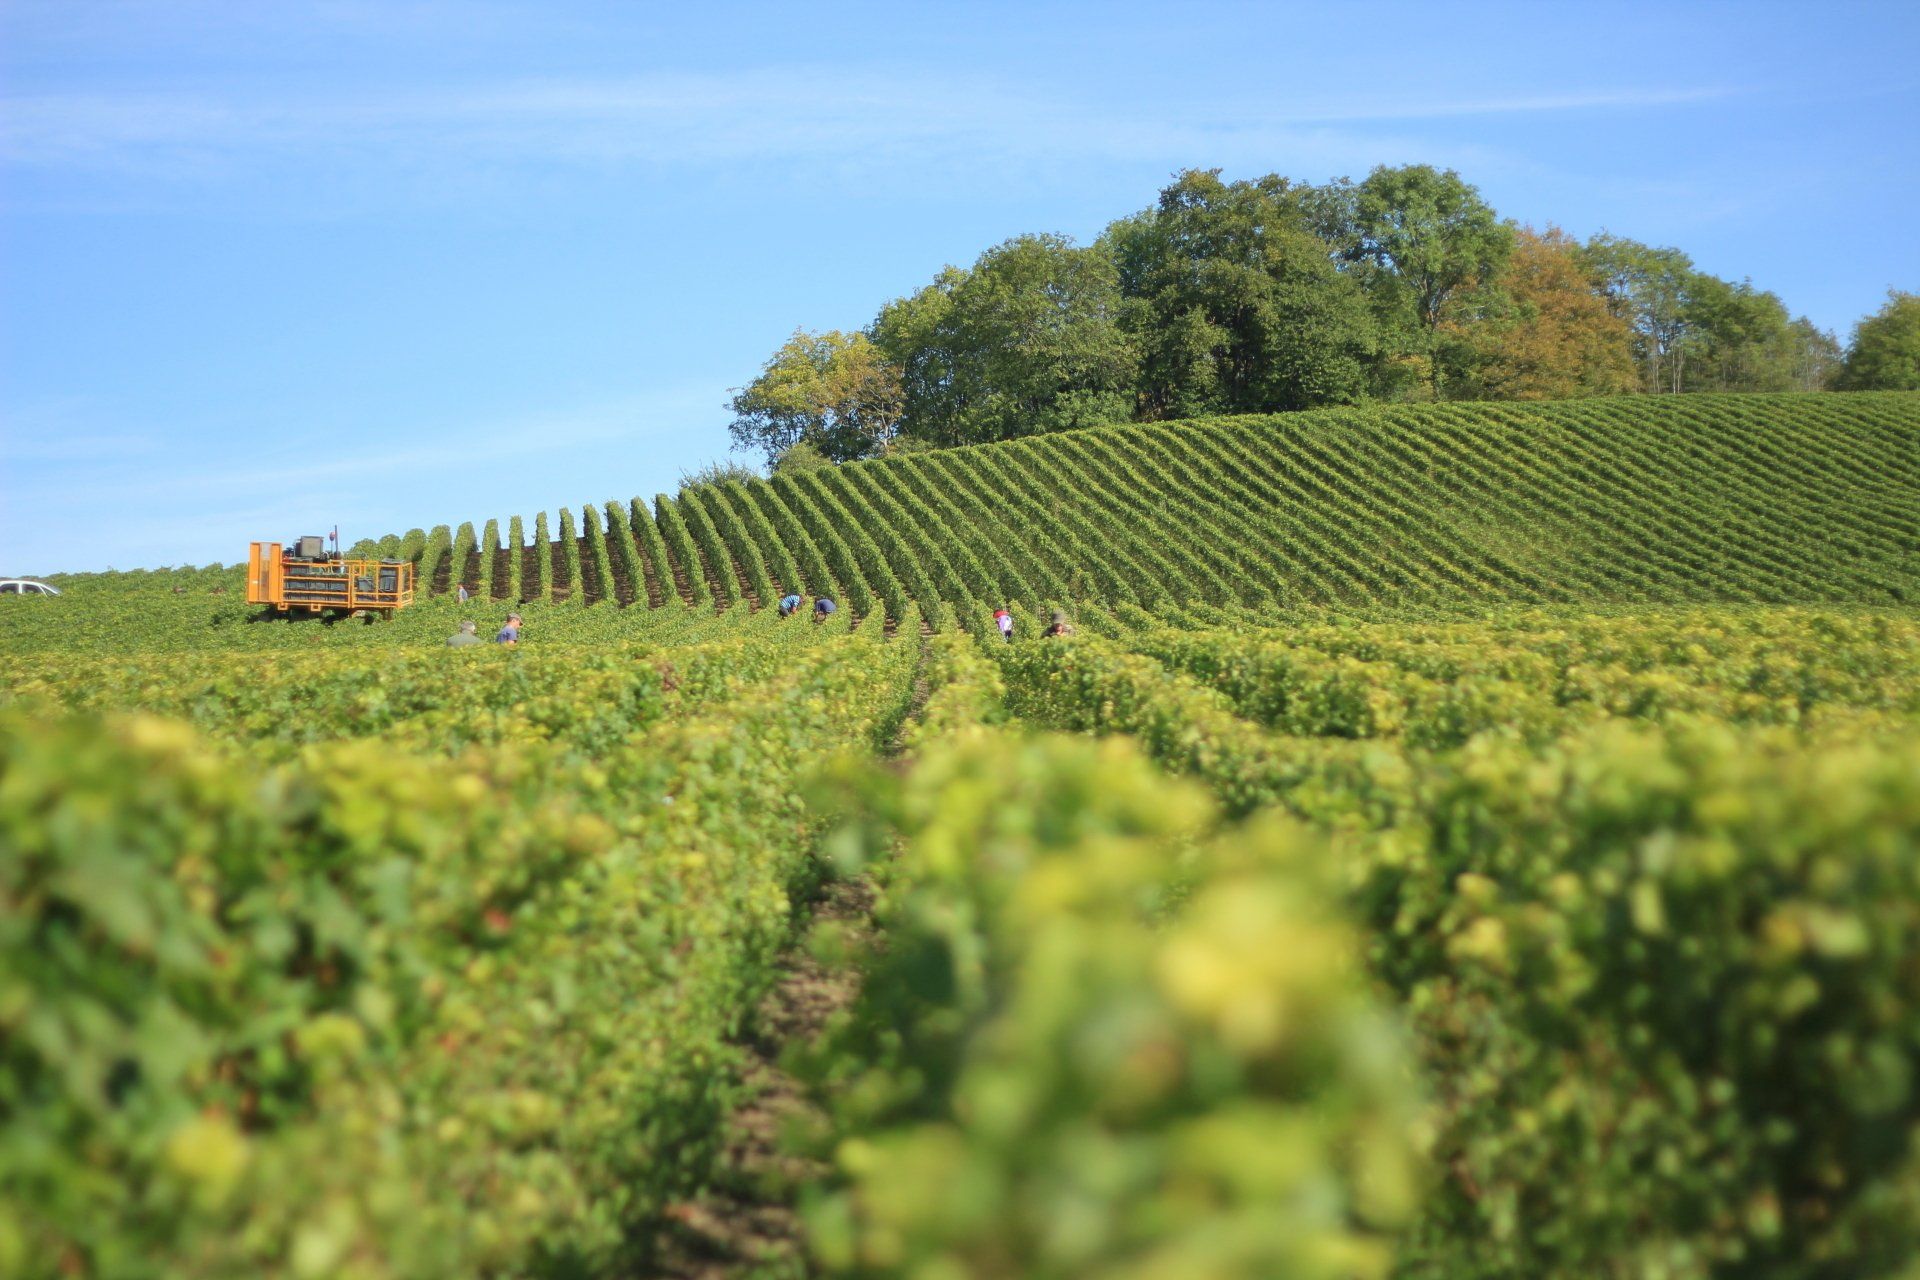 A tractor is driving through a vineyard on a sunny day.